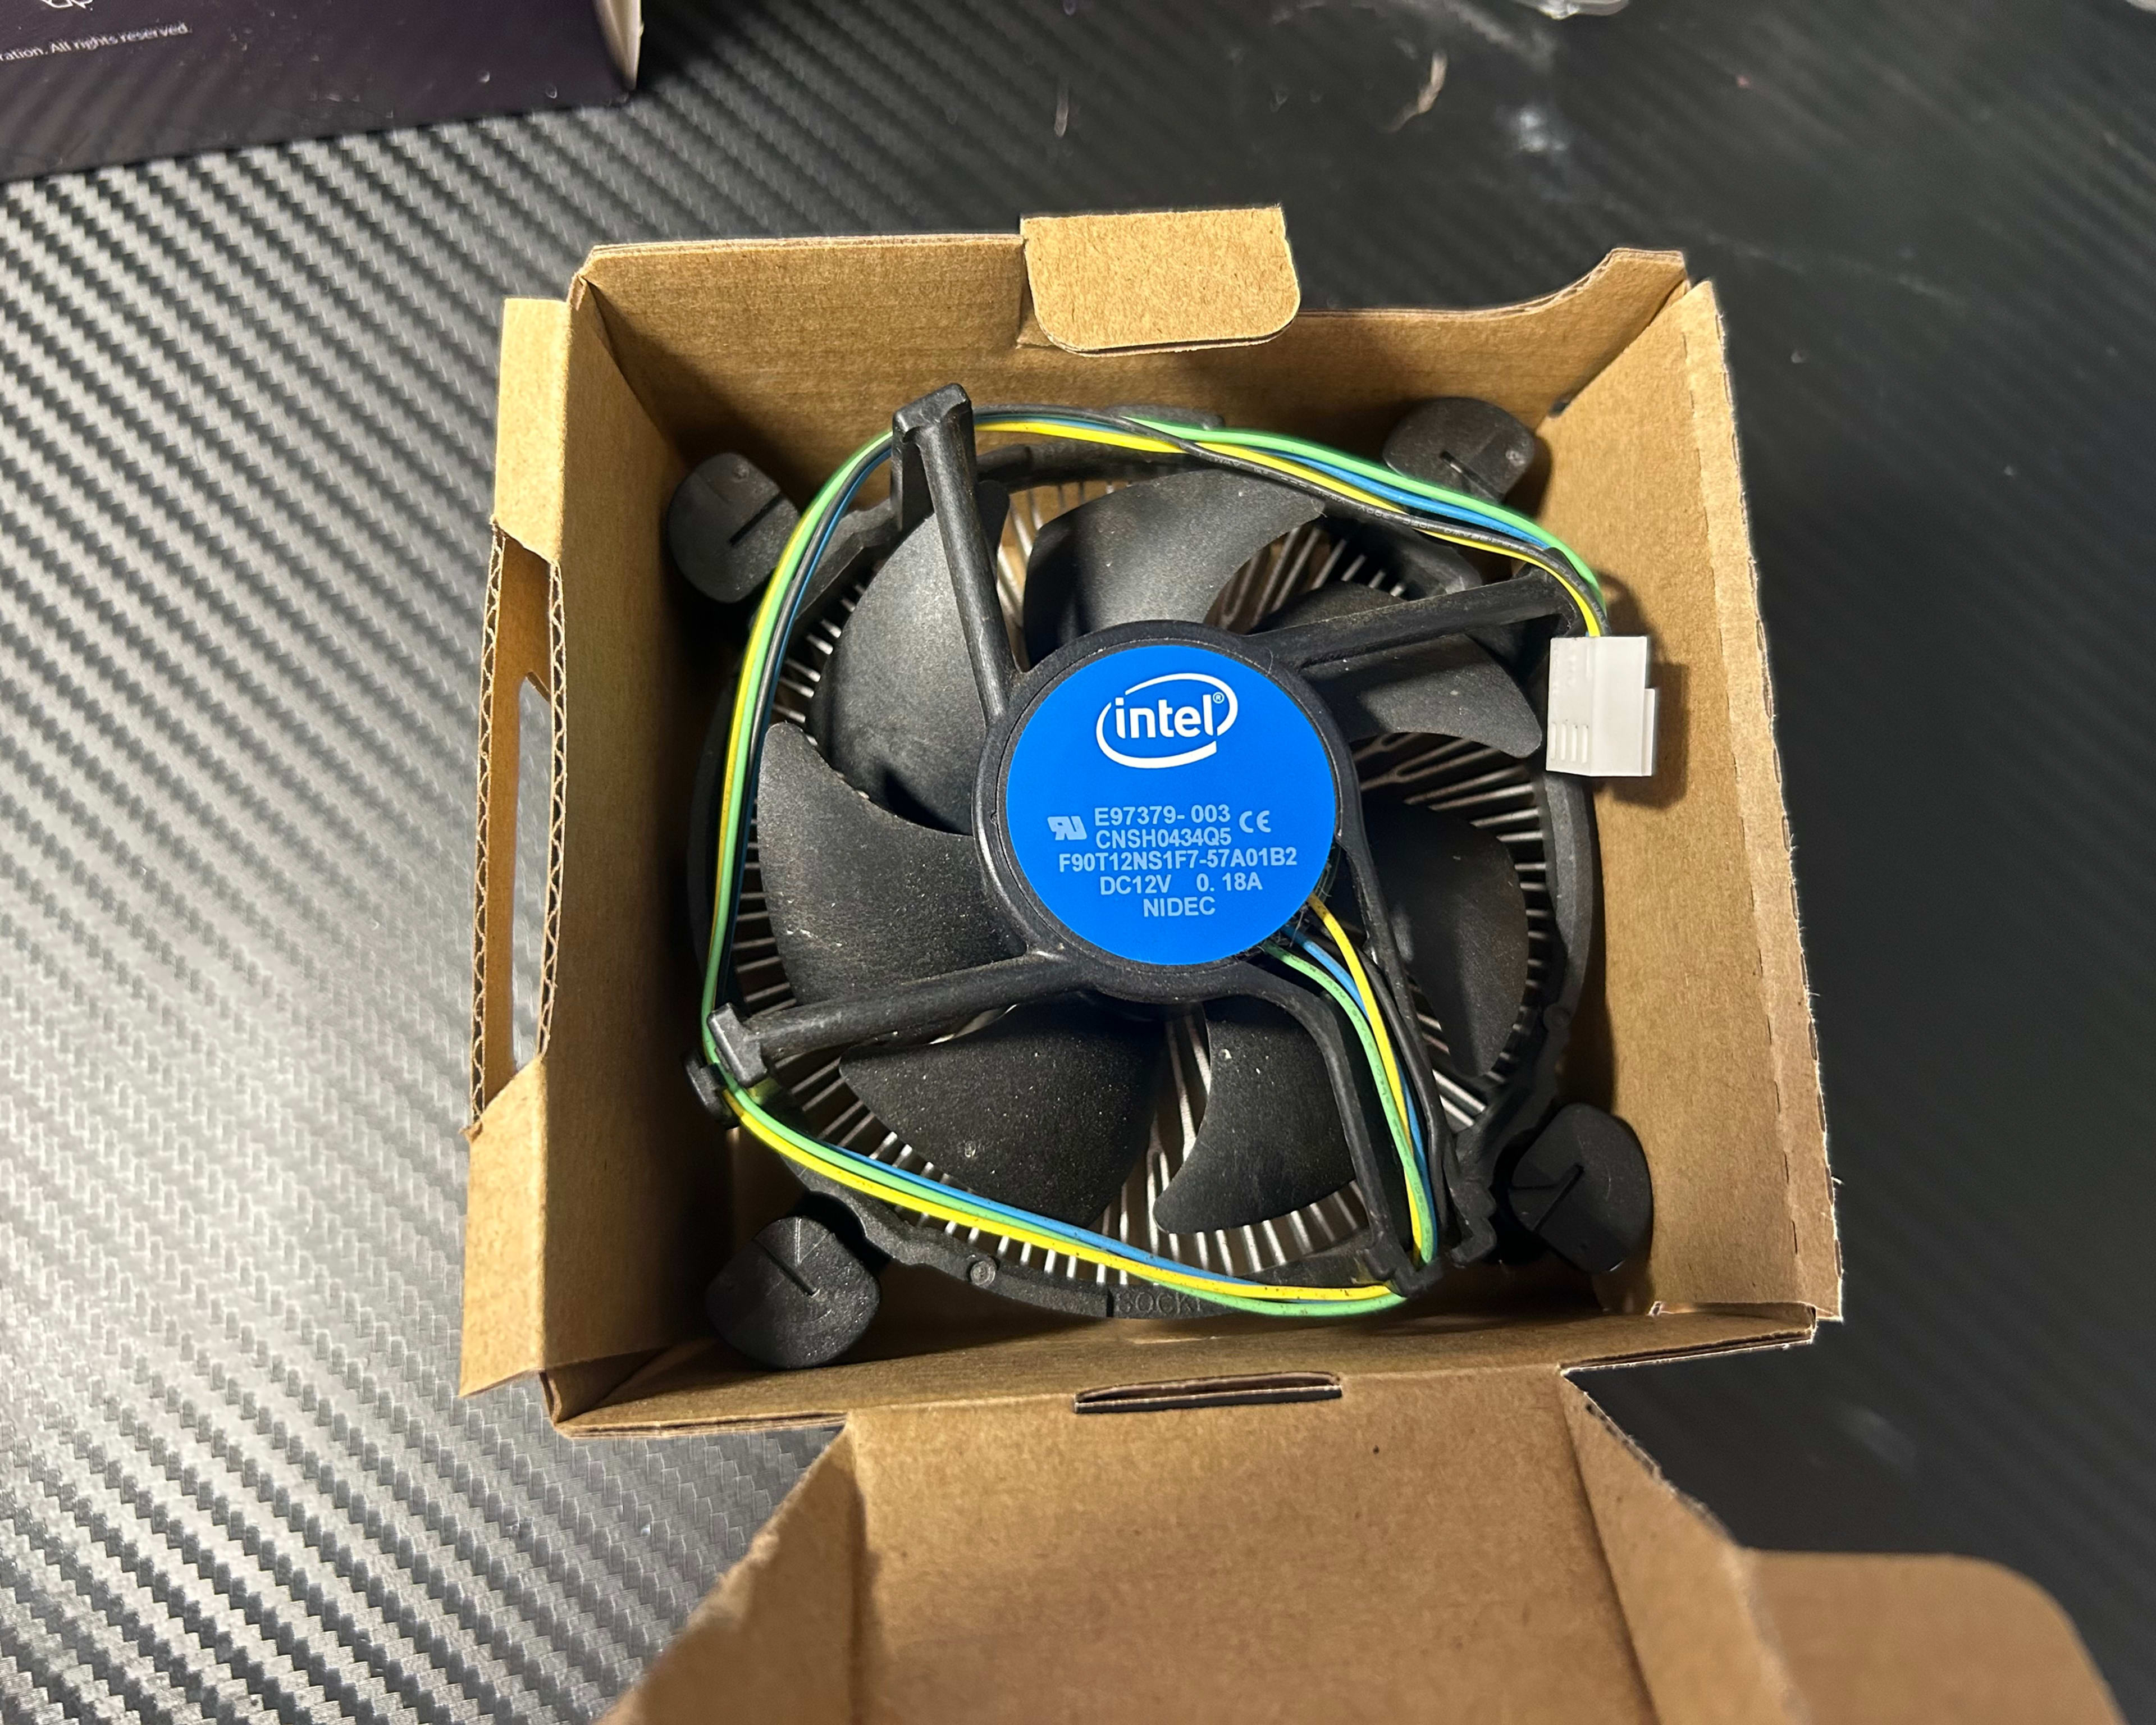 Intel Stock Cooler Fan with Intel i3-9100 Box and Manual